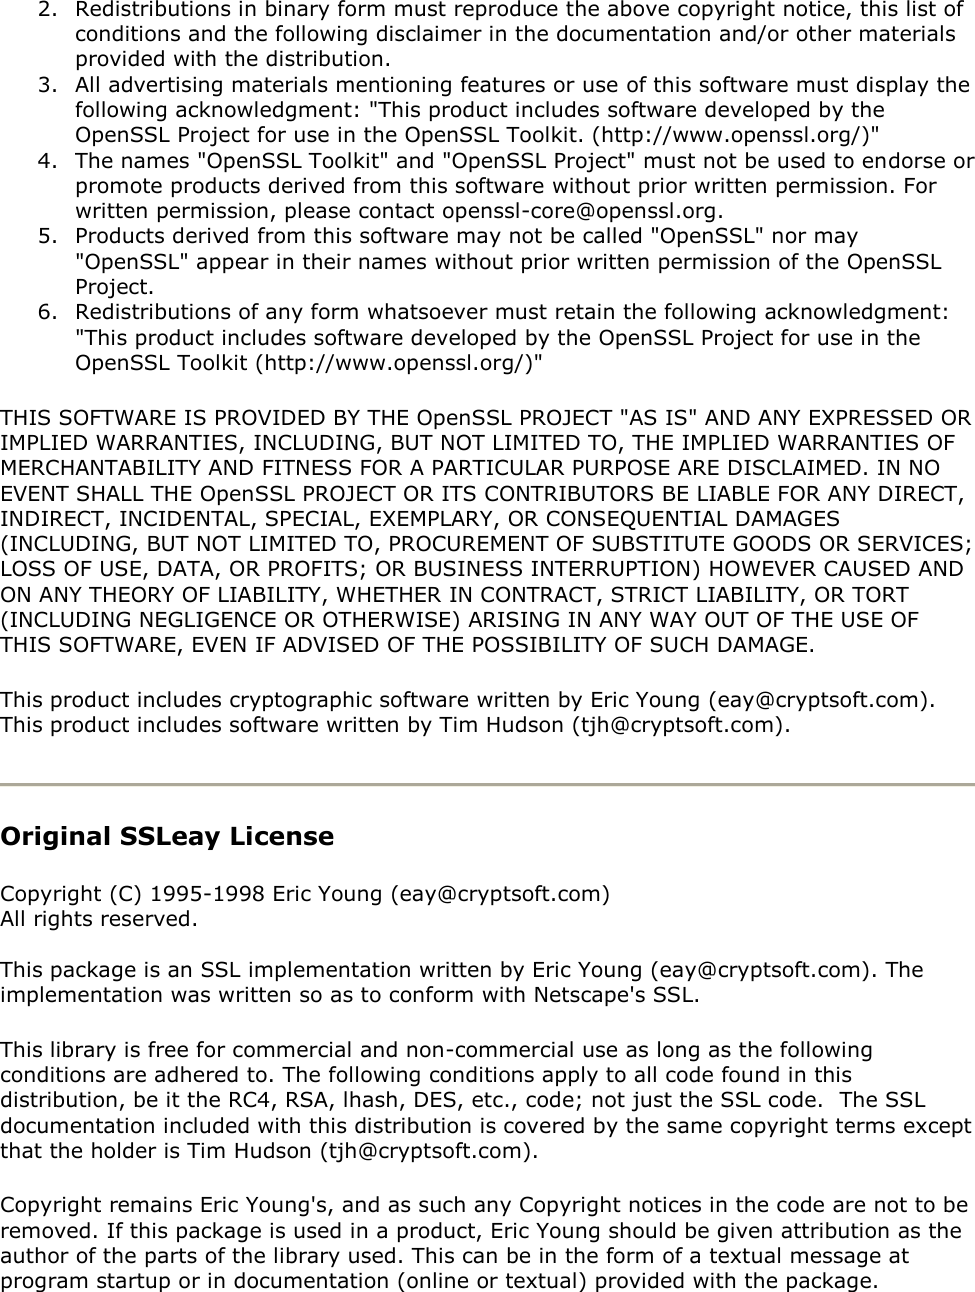 2. Redistributions in binary form must reproduce the above copyright notice, this list of conditions and the following disclaimer in the documentation and/or other materials provided with the distribution. 3. All advertising materials mentioning features or use of this software must display the following acknowledgment: &quot;This product includes software developed by the OpenSSL Project for use in the OpenSSL Toolkit. (http://www.openssl.org/)&quot; 4. The names &quot;OpenSSL Toolkit&quot; and &quot;OpenSSL Project&quot; must not be used to endorse or promote products derived from this software without prior written permission. For written permission, please contact openssl-core@openssl.org. 5. Products derived from this software may not be called &quot;OpenSSL&quot; nor may &quot;OpenSSL&quot; appear in their names without prior written permission of the OpenSSL Project. 6. Redistributions of any form whatsoever must retain the following acknowledgment: &quot;This product includes software developed by the OpenSSL Project for use in the OpenSSL Toolkit (http://www.openssl.org/)&quot; THIS SOFTWARE IS PROVIDED BY THE OpenSSL PROJECT &quot;AS IS&quot; AND ANY EXPRESSED OR IMPLIED WARRANTIES, INCLUDING, BUT NOT LIMITED TO, THE IMPLIED WARRANTIES OF MERCHANTABILITY AND FITNESS FOR A PARTICULAR PURPOSE ARE DISCLAIMED. IN NO EVENT SHALL THE OpenSSL PROJECT OR ITS CONTRIBUTORS BE LIABLE FOR ANY DIRECT, INDIRECT, INCIDENTAL, SPECIAL, EXEMPLARY, OR CONSEQUENTIAL DAMAGES (INCLUDING, BUT NOT LIMITED TO, PROCUREMENT OF SUBSTITUTE GOODS OR SERVICES; LOSS OF USE, DATA, OR PROFITS; OR BUSINESS INTERRUPTION) HOWEVER CAUSED AND ON ANY THEORY OF LIABILITY, WHETHER IN CONTRACT, STRICT LIABILITY, OR TORT (INCLUDING NEGLIGENCE OR OTHERWISE) ARISING IN ANY WAY OUT OF THE USE OF THIS SOFTWARE, EVEN IF ADVISED OF THE POSSIBILITY OF SUCH DAMAGE. This product includes cryptographic software written by Eric Young (eay@cryptsoft.com).  This product includes software written by Tim Hudson (tjh@cryptsoft.com).  Original SSLeay License  Copyright (C) 1995-1998 Eric Young (eay@cryptsoft.com) All rights reserved.  This package is an SSL implementation written by Eric Young (eay@cryptsoft.com). The implementation was written so as to conform with Netscape&apos;s SSL. This library is free for commercial and non-commercial use as long as the following conditions are adhered to. The following conditions apply to all code found in this distribution, be it the RC4, RSA, lhash, DES, etc., code; not just the SSL code.  The SSL documentation included with this distribution is covered by the same copyright terms except that the holder is Tim Hudson (tjh@cryptsoft.com). Copyright remains Eric Young&apos;s, and as such any Copyright notices in the code are not to be removed. If this package is used in a product, Eric Young should be given attribution as the author of the parts of the library used. This can be in the form of a textual message at program startup or in documentation (online or textual) provided with the package. 